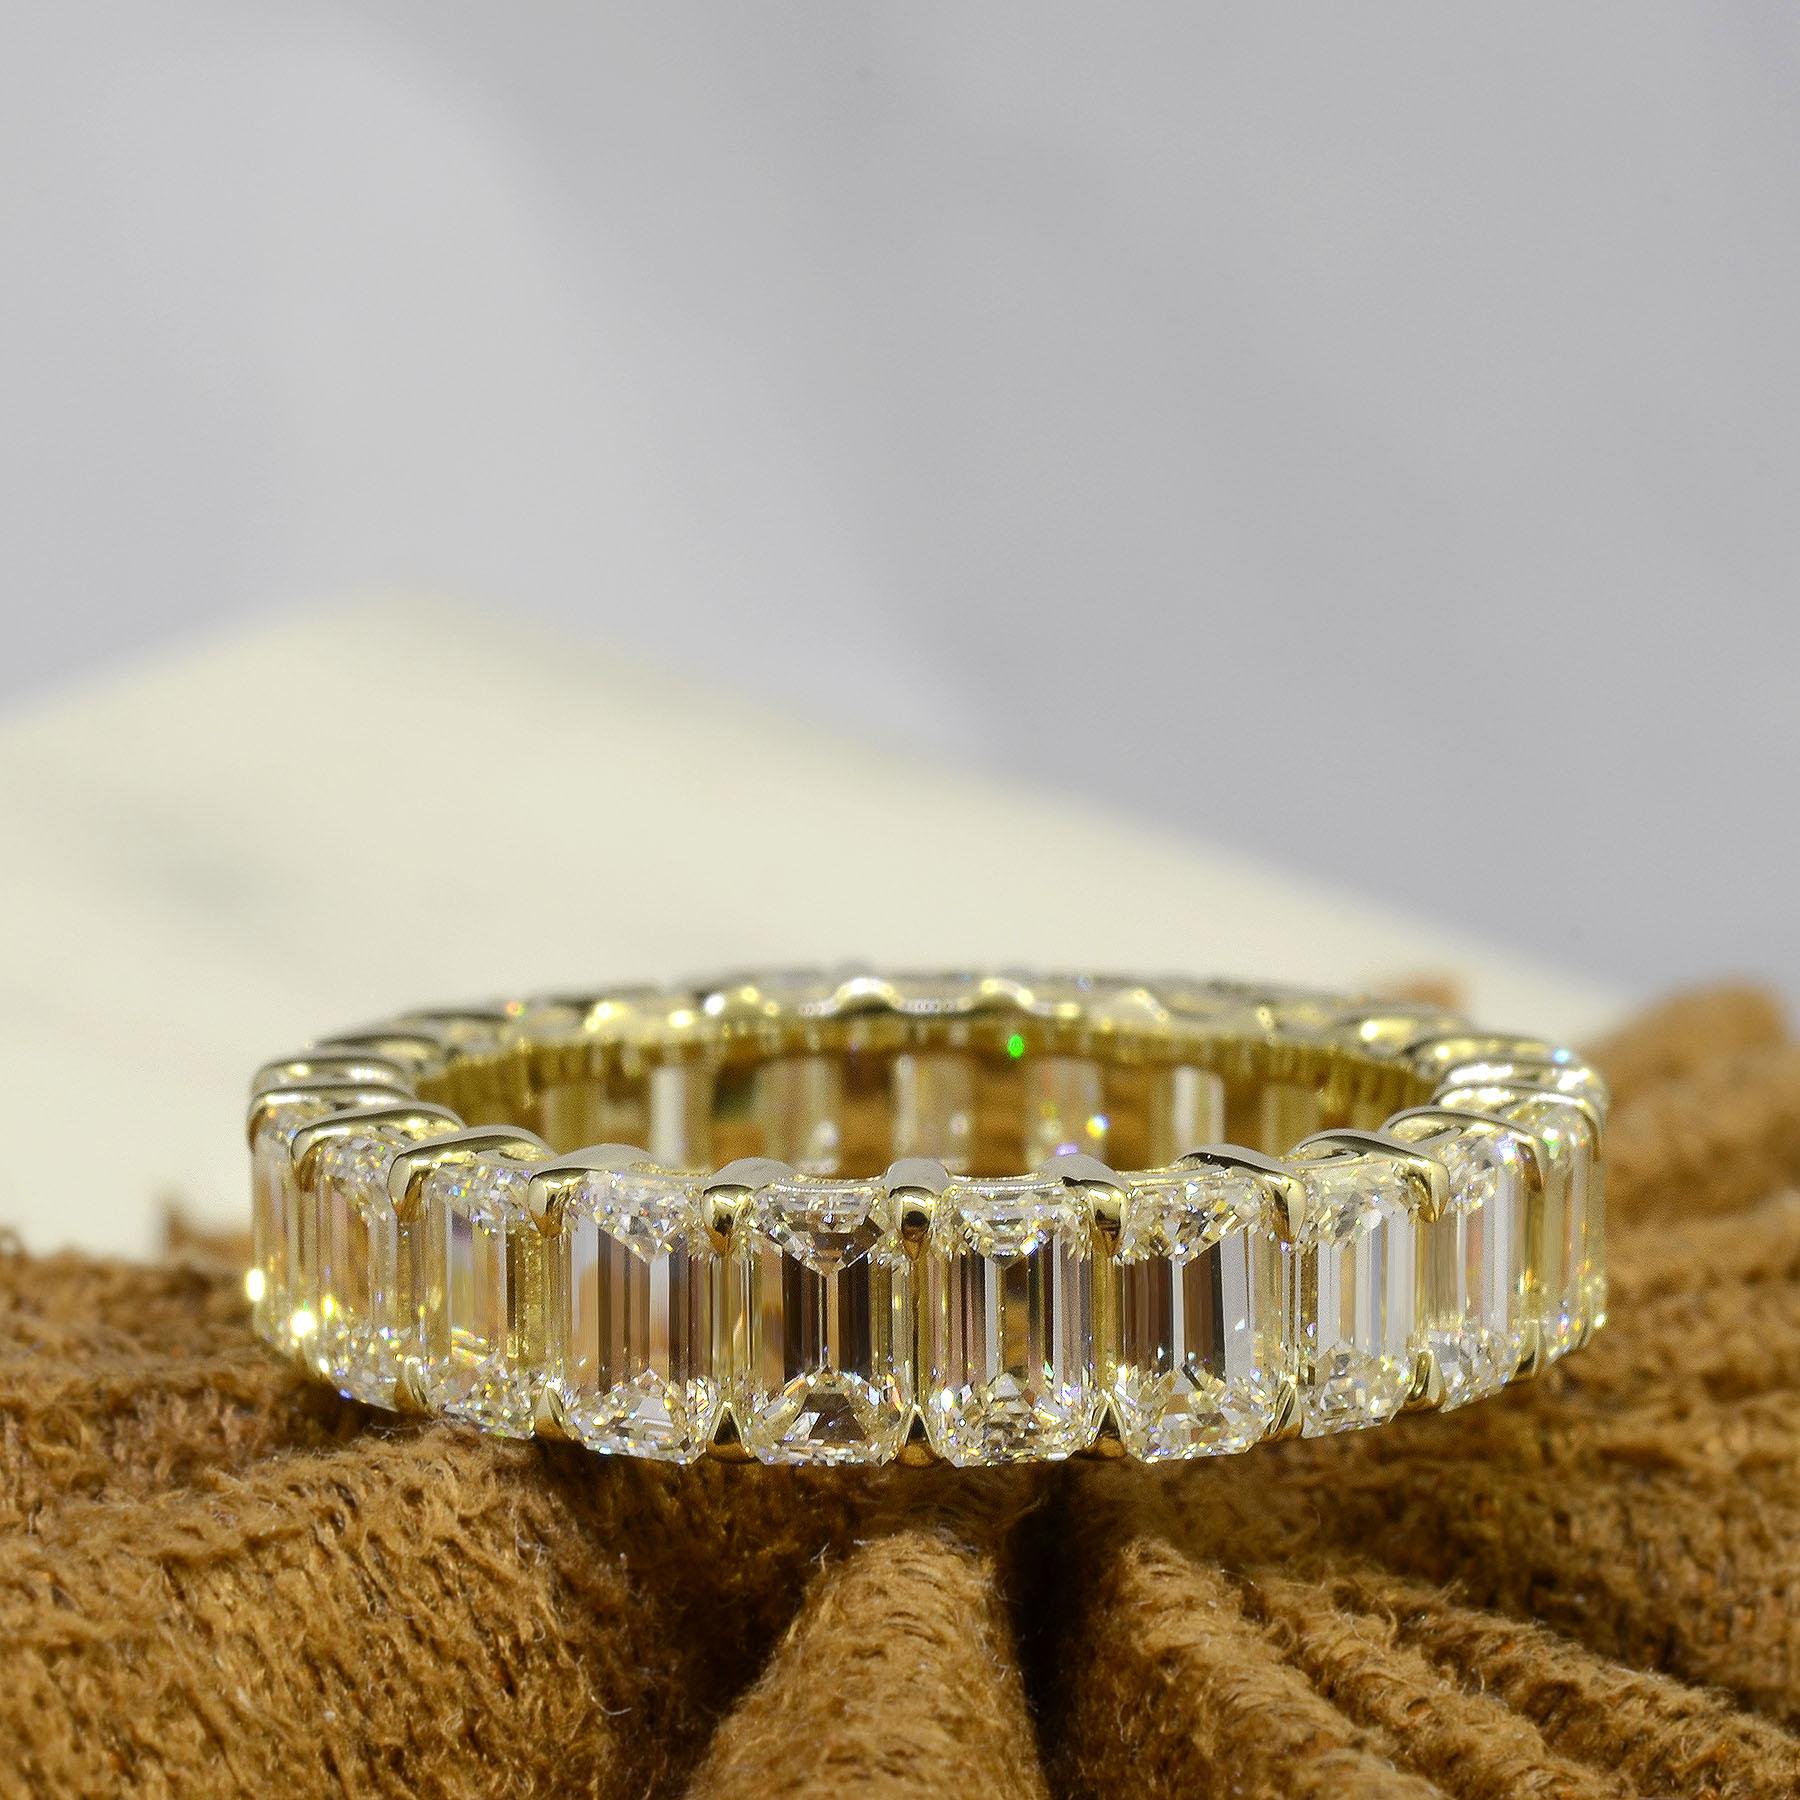 For Sale:  4 Carat Emerald Cut Eternity Band Gallery Style F-G Color VS1 Clarity 18k Gold 8